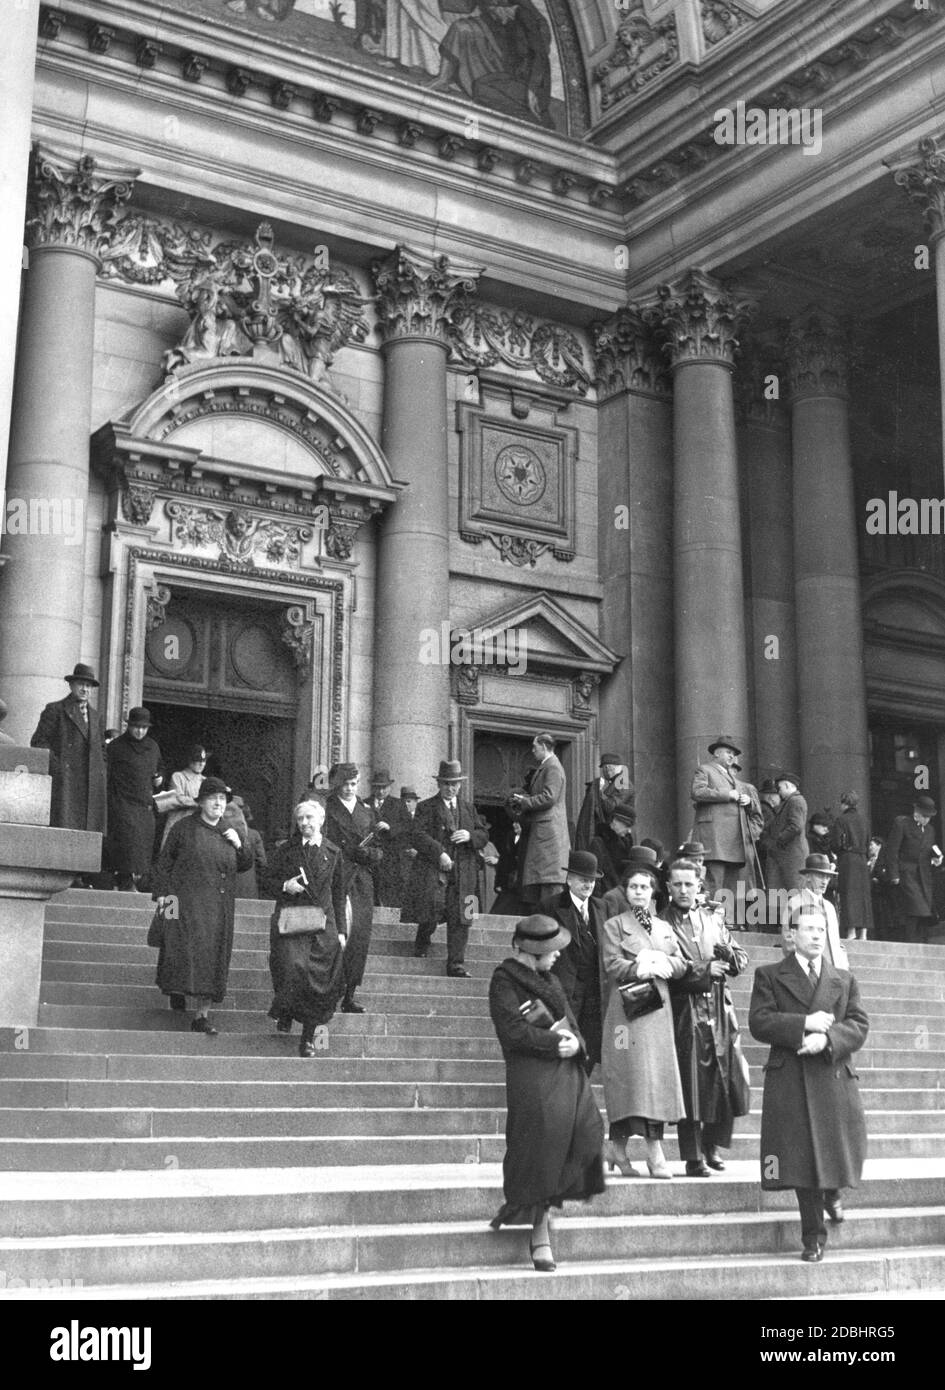 The photograph shows the main entrance to the Berlin Cathedral on April 10, 1936. The Good Friday service has just ended and churchgoers are leaving the Cathedral. Stock Photo